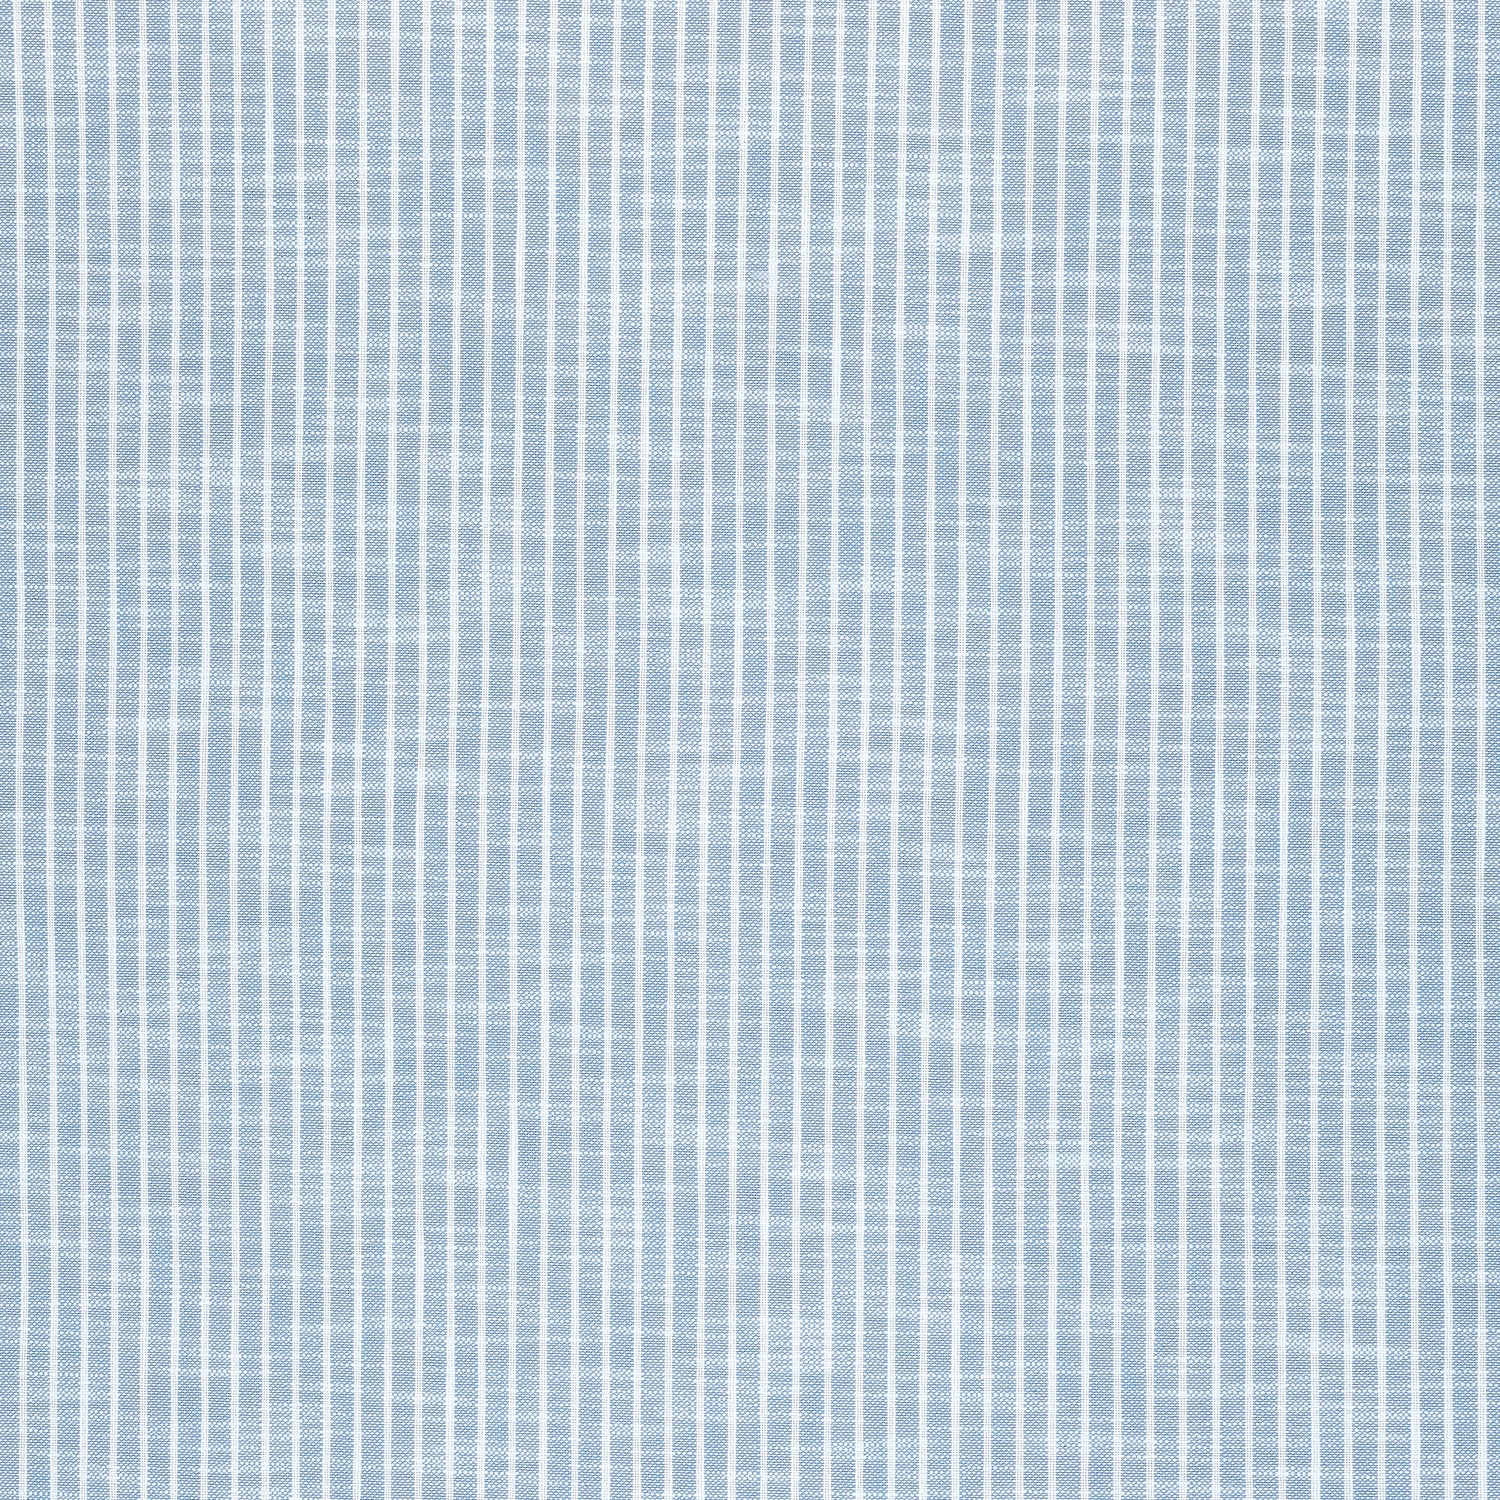 Bayside Stripe fabric in sky color - pattern number W73476 - by Thibaut in the Landmark collection